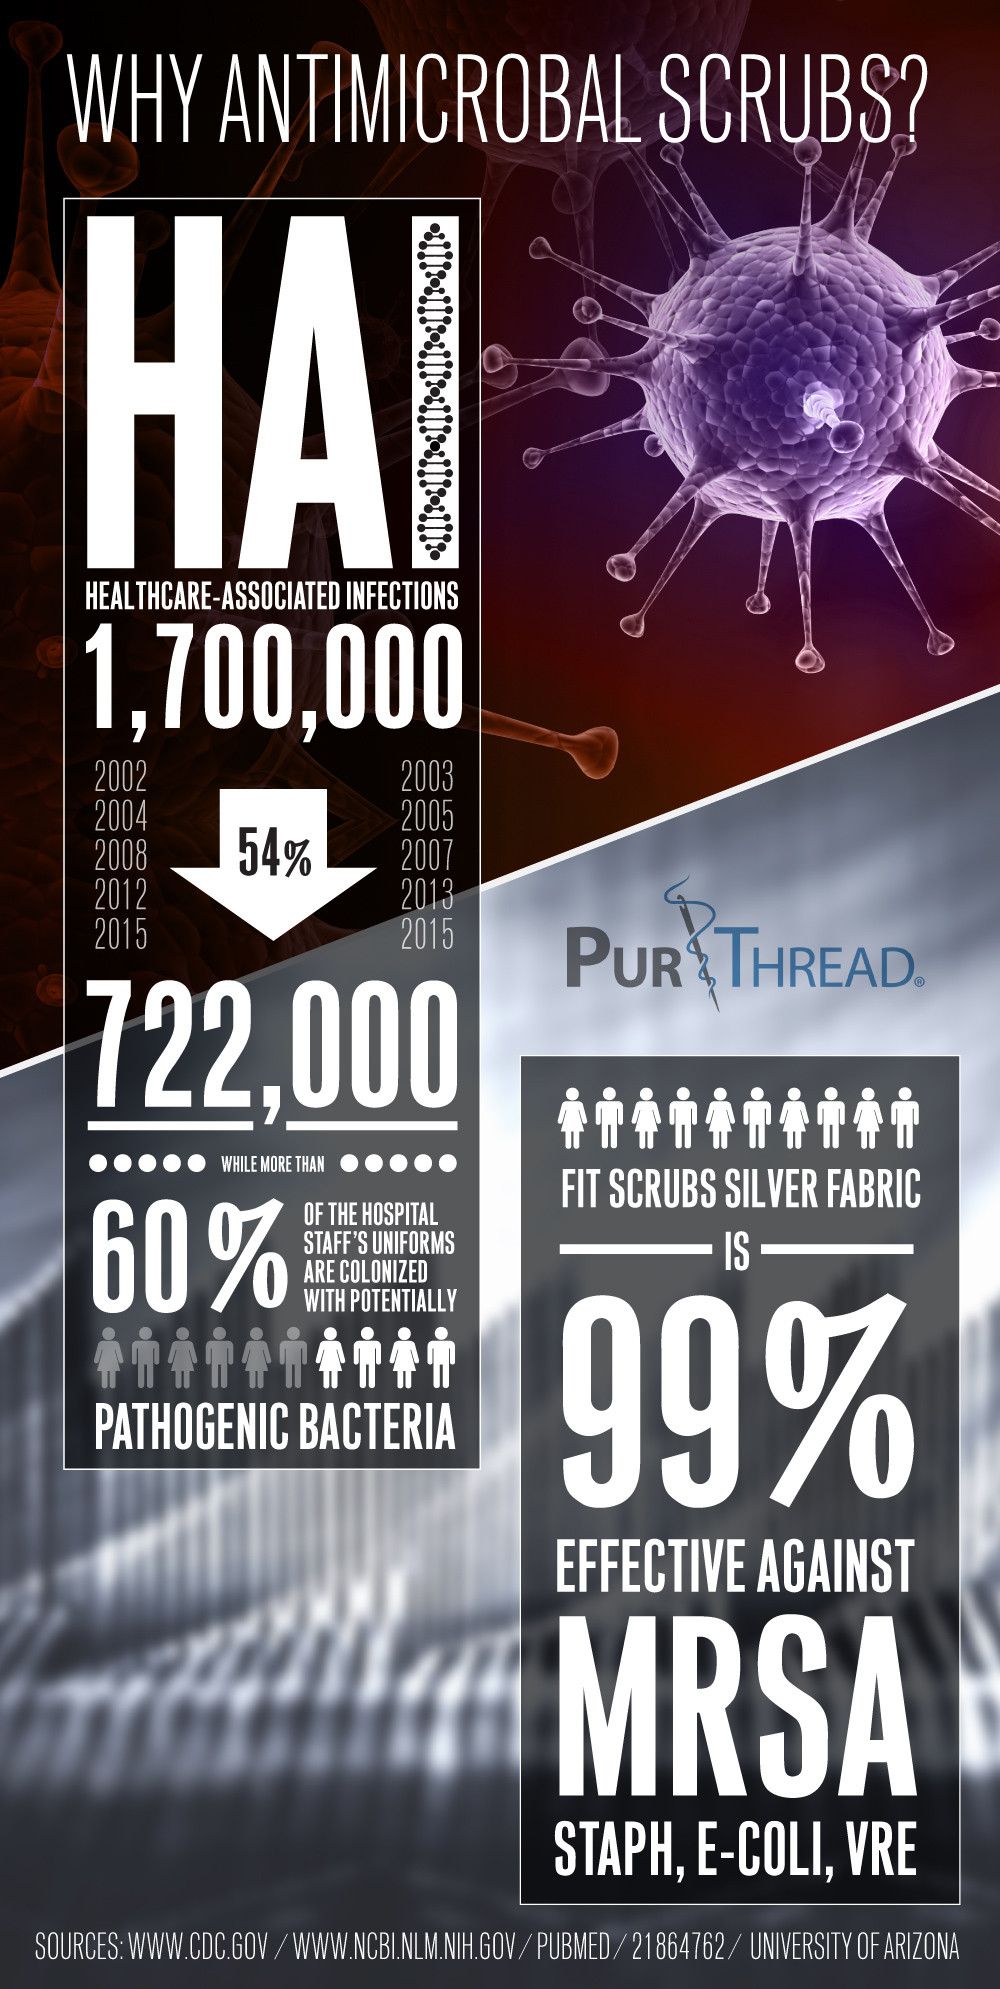 Antimicrobal scrubs infographic design by Maxwell Alexander